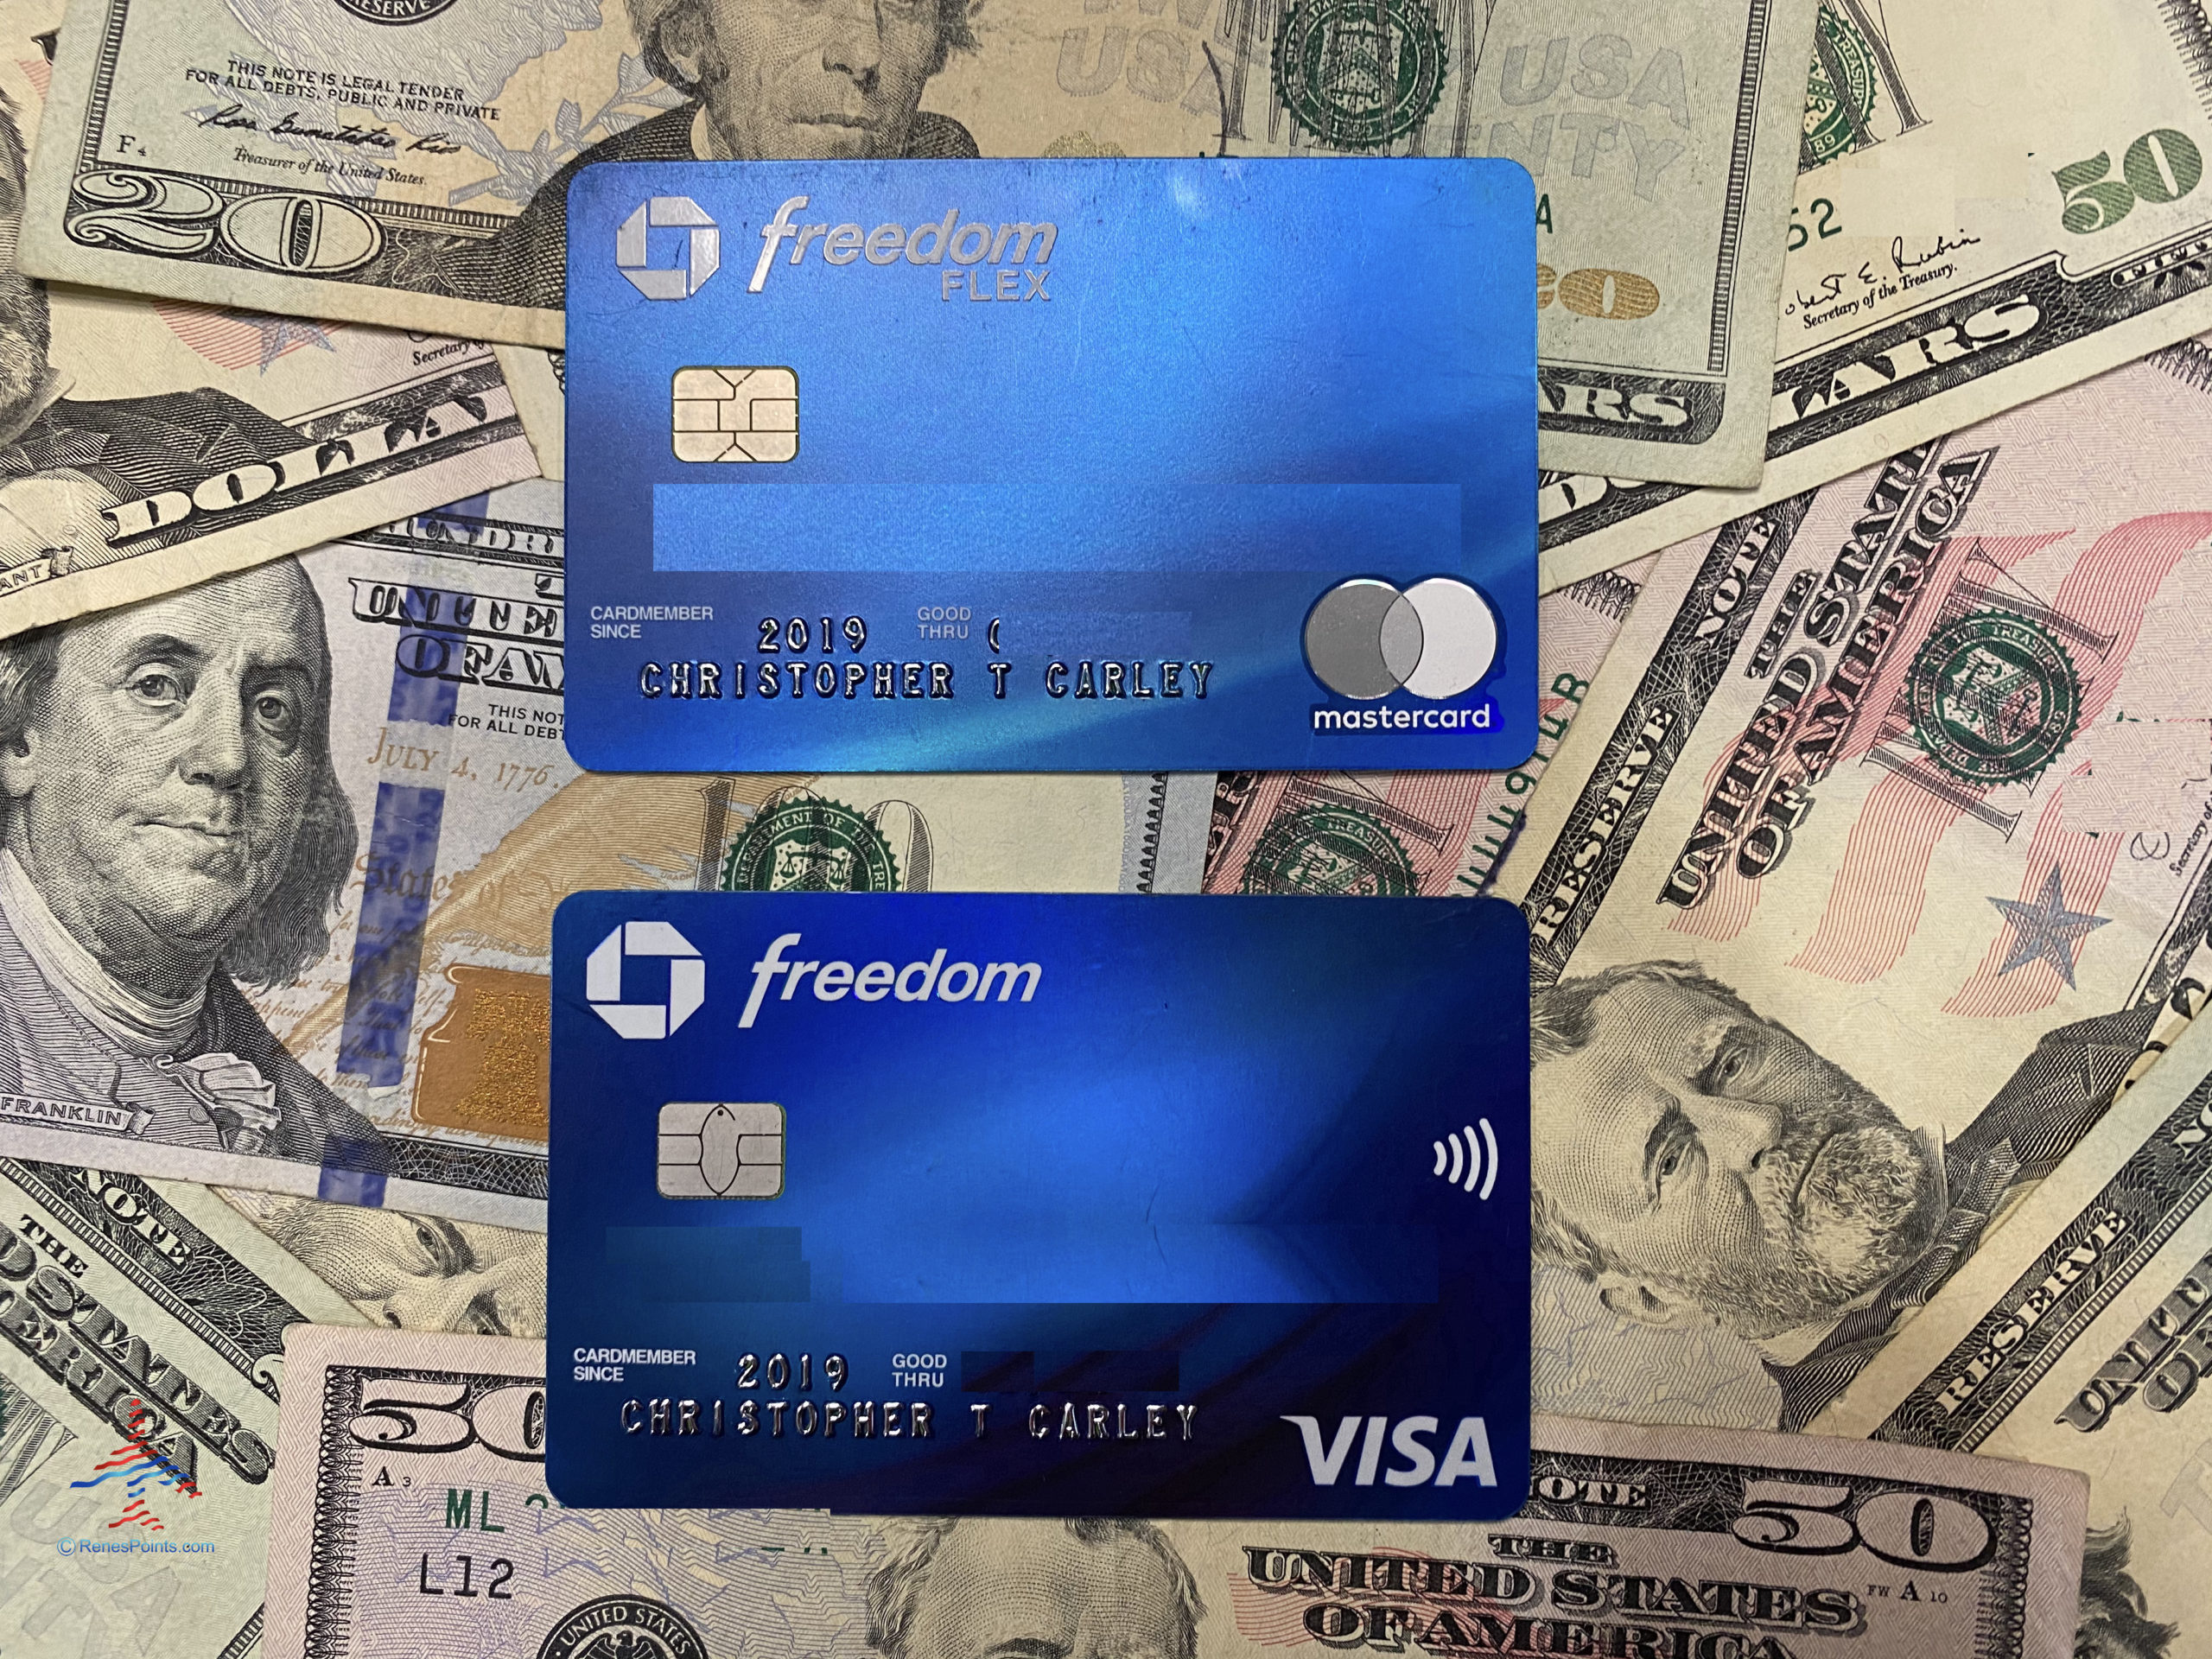 Chase Freedom Flex℠ and Chase Freedom cashback credit cards